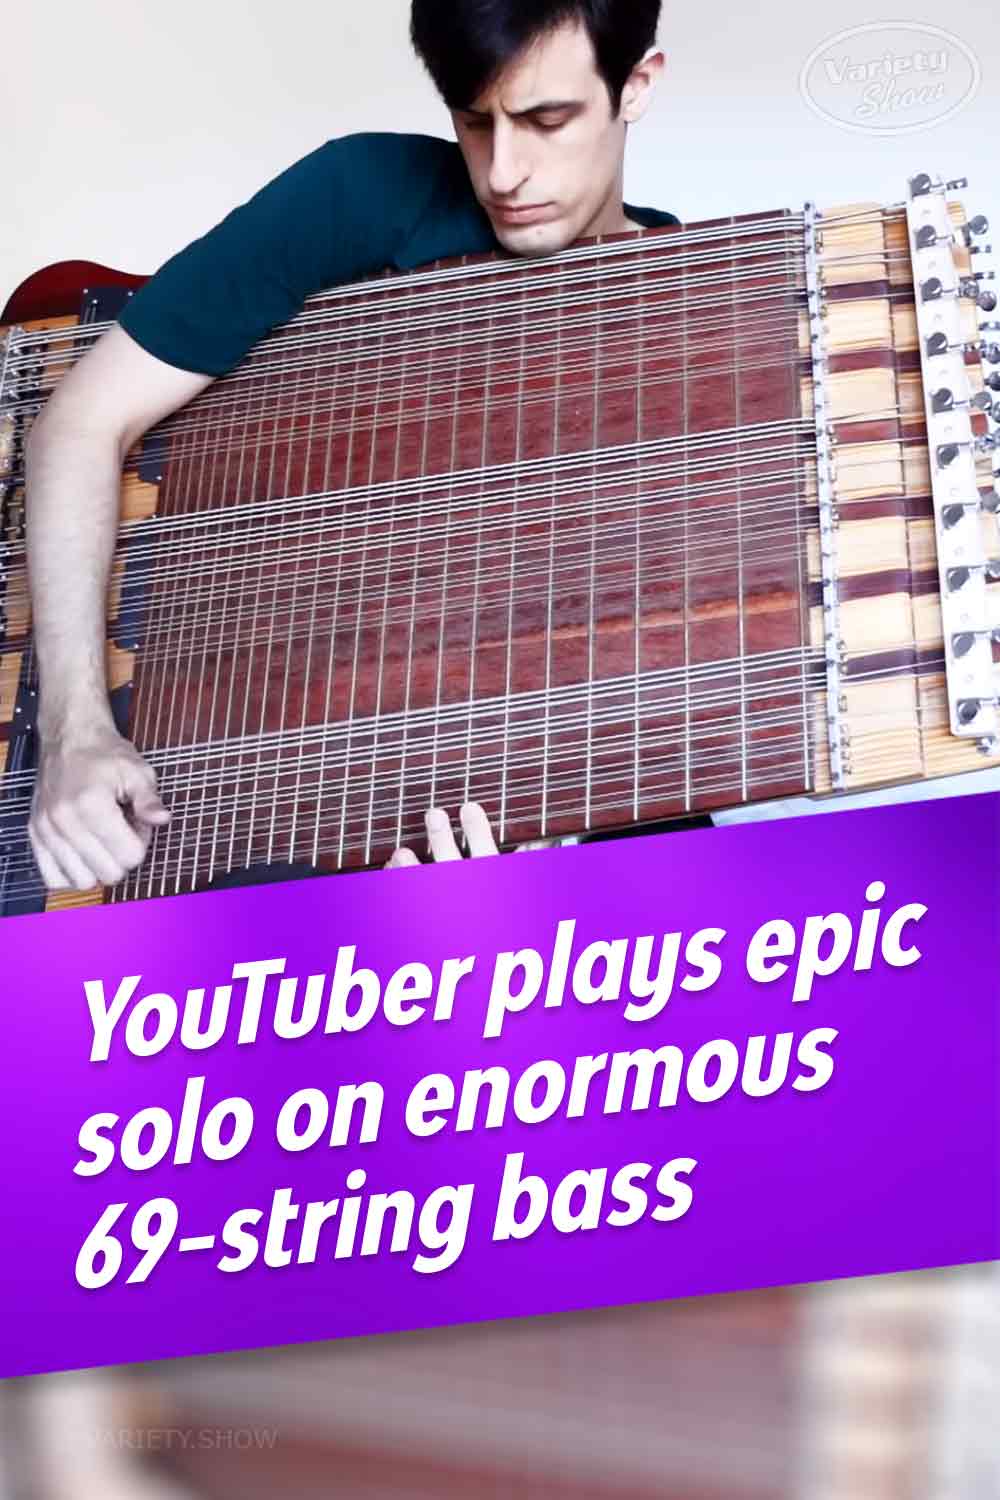 YouTuber plays epic solo on enormous 69-string bass